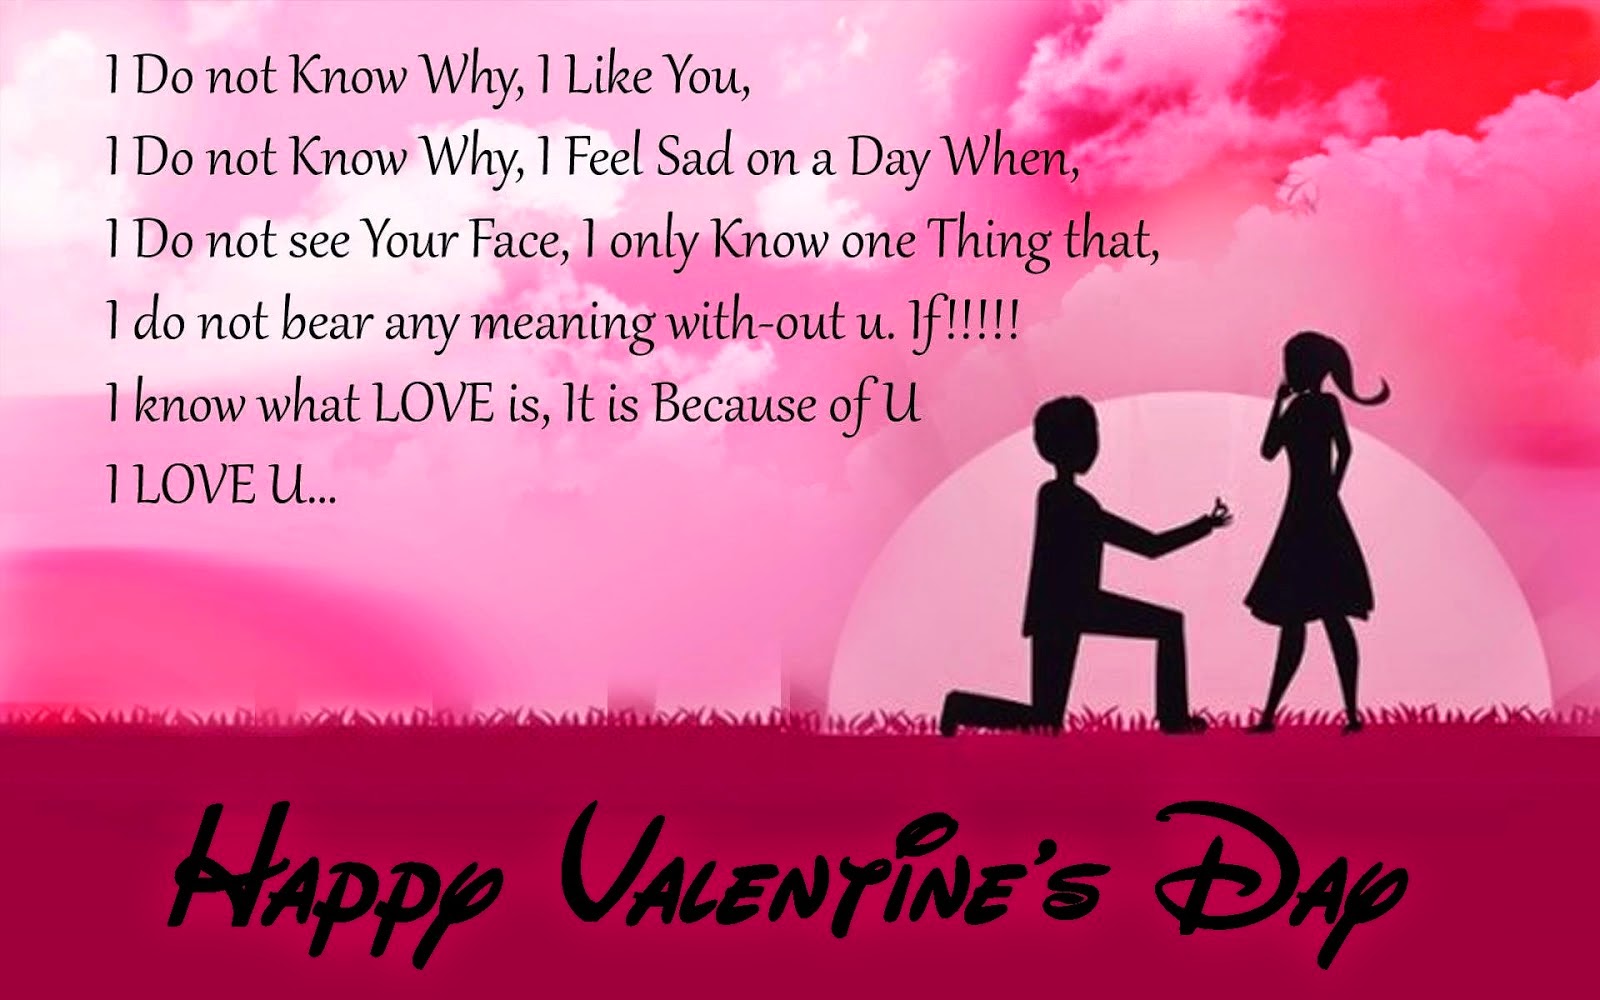 valentinesday special romantic Messages 1